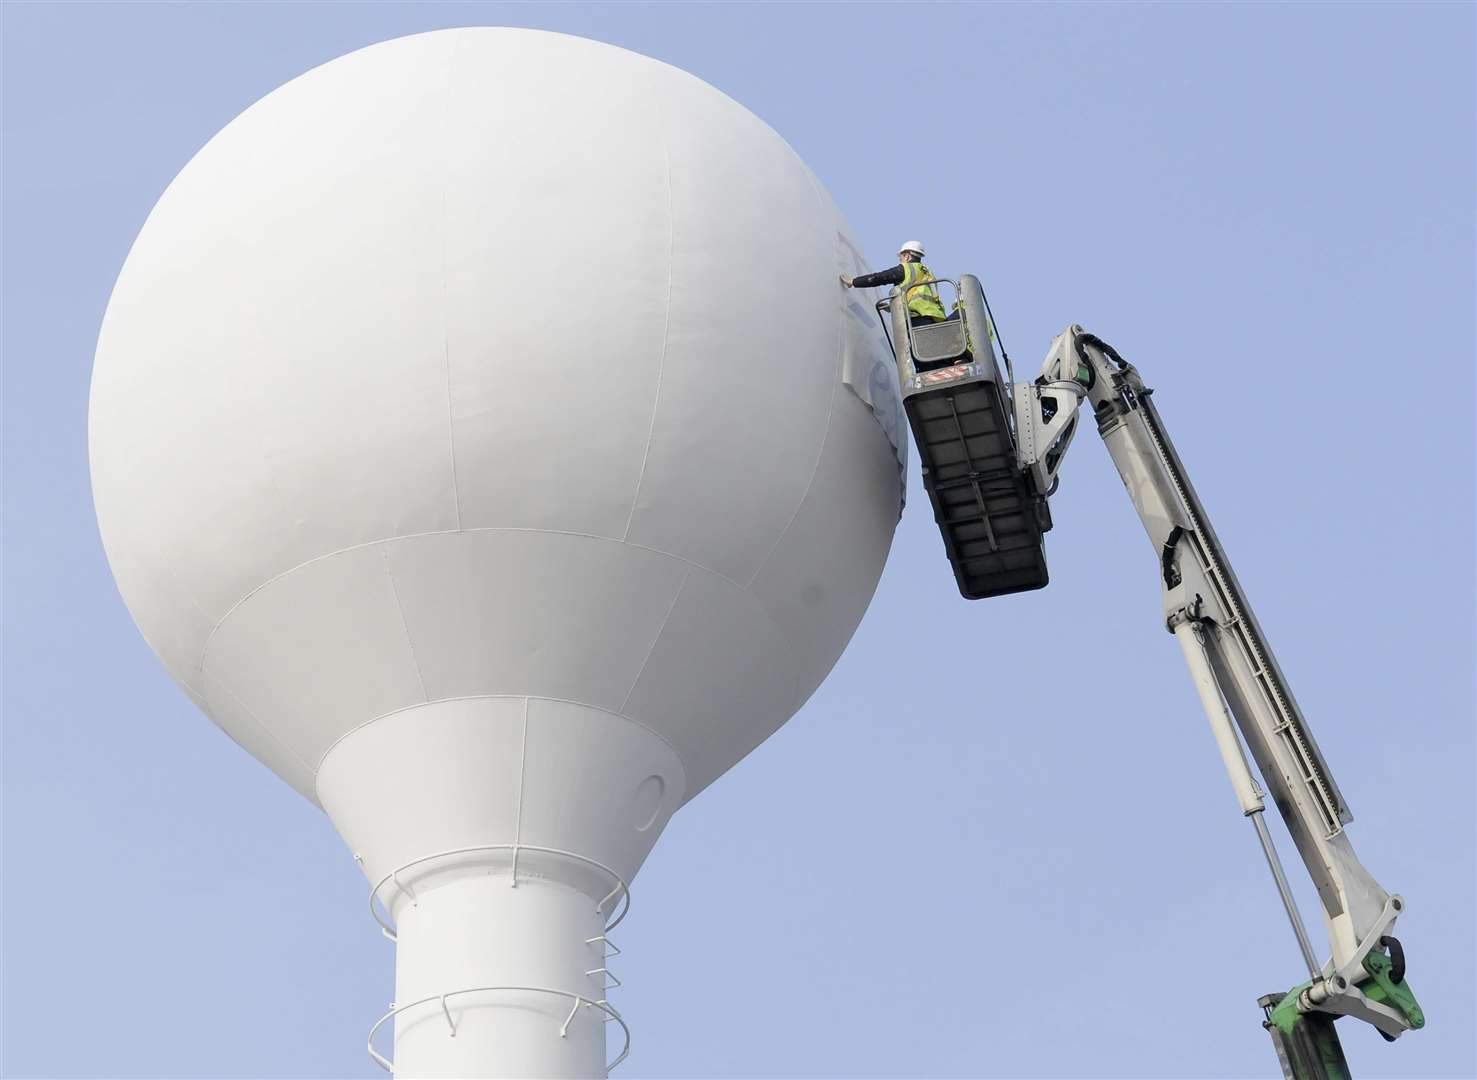 The water tower was repainted in 2011 after the Tesco store at Bowaters Roundabout, Gillingham, was refurbished.